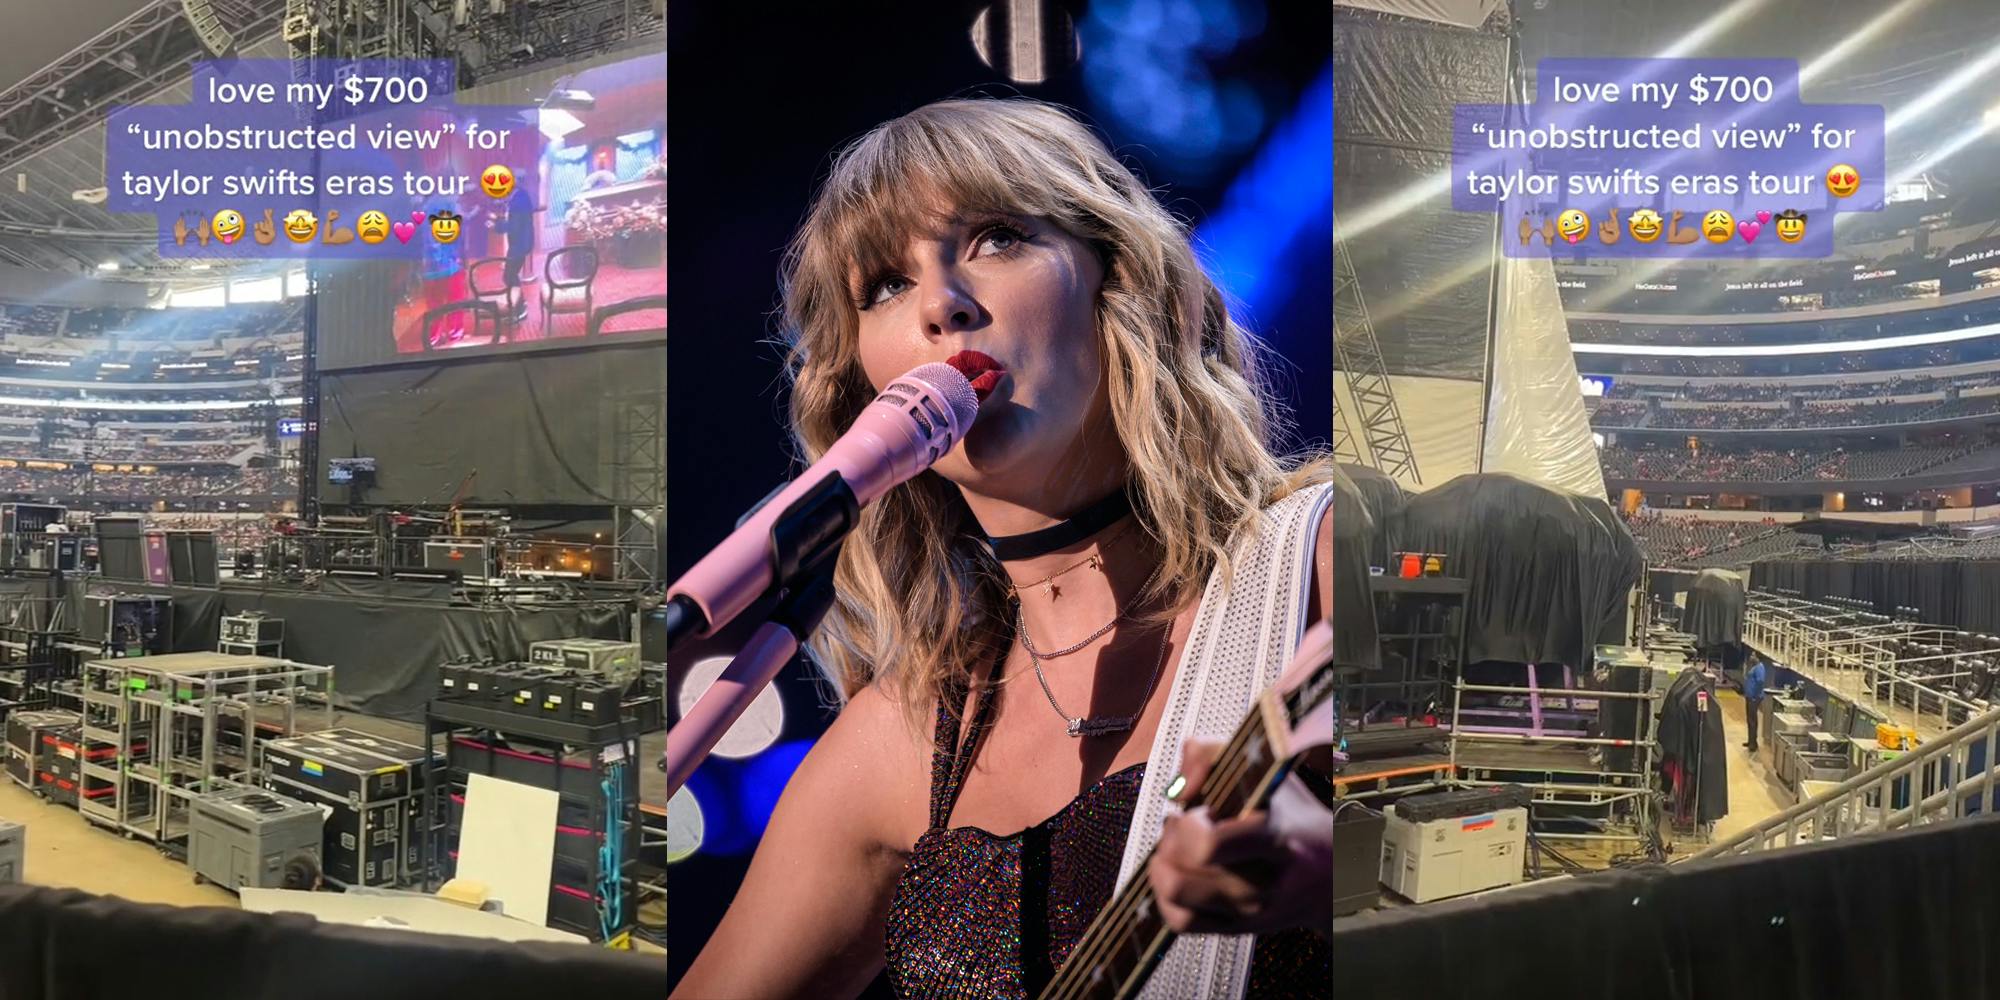 concert setup with caption "love my $700 "unobstructed view" for taylor swifts eras tour" (l) Taylor Swift singing into pink microphone in front of dark background (c) concert setup with caption "love my $700 "unobstructed view" for taylor swifts eras tour" (r)